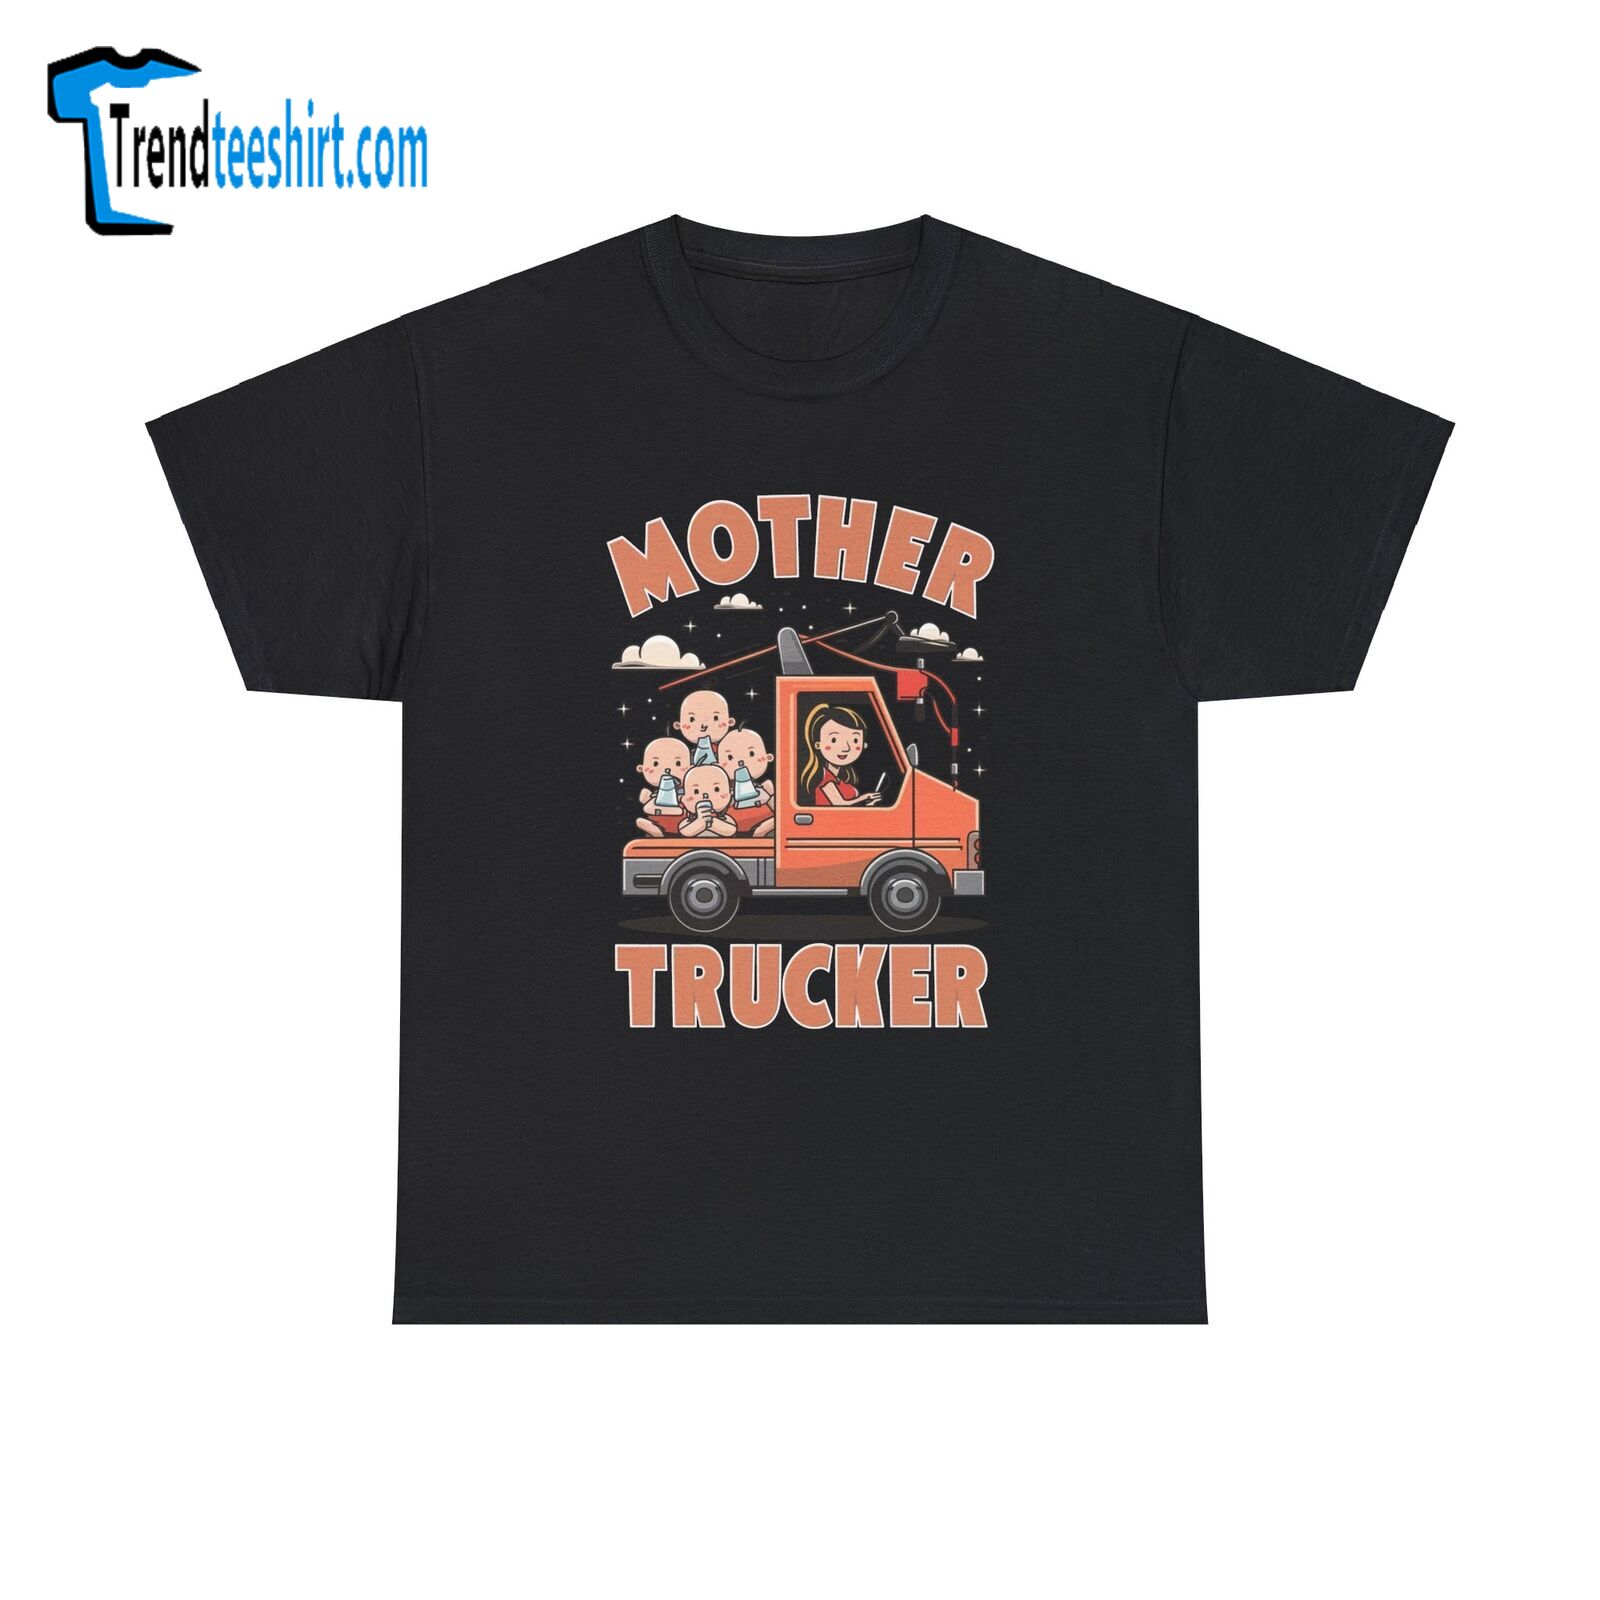 Mother Trucker Truck Mother's Day Funny Comical Humor Gag Gift Tee T-shirt